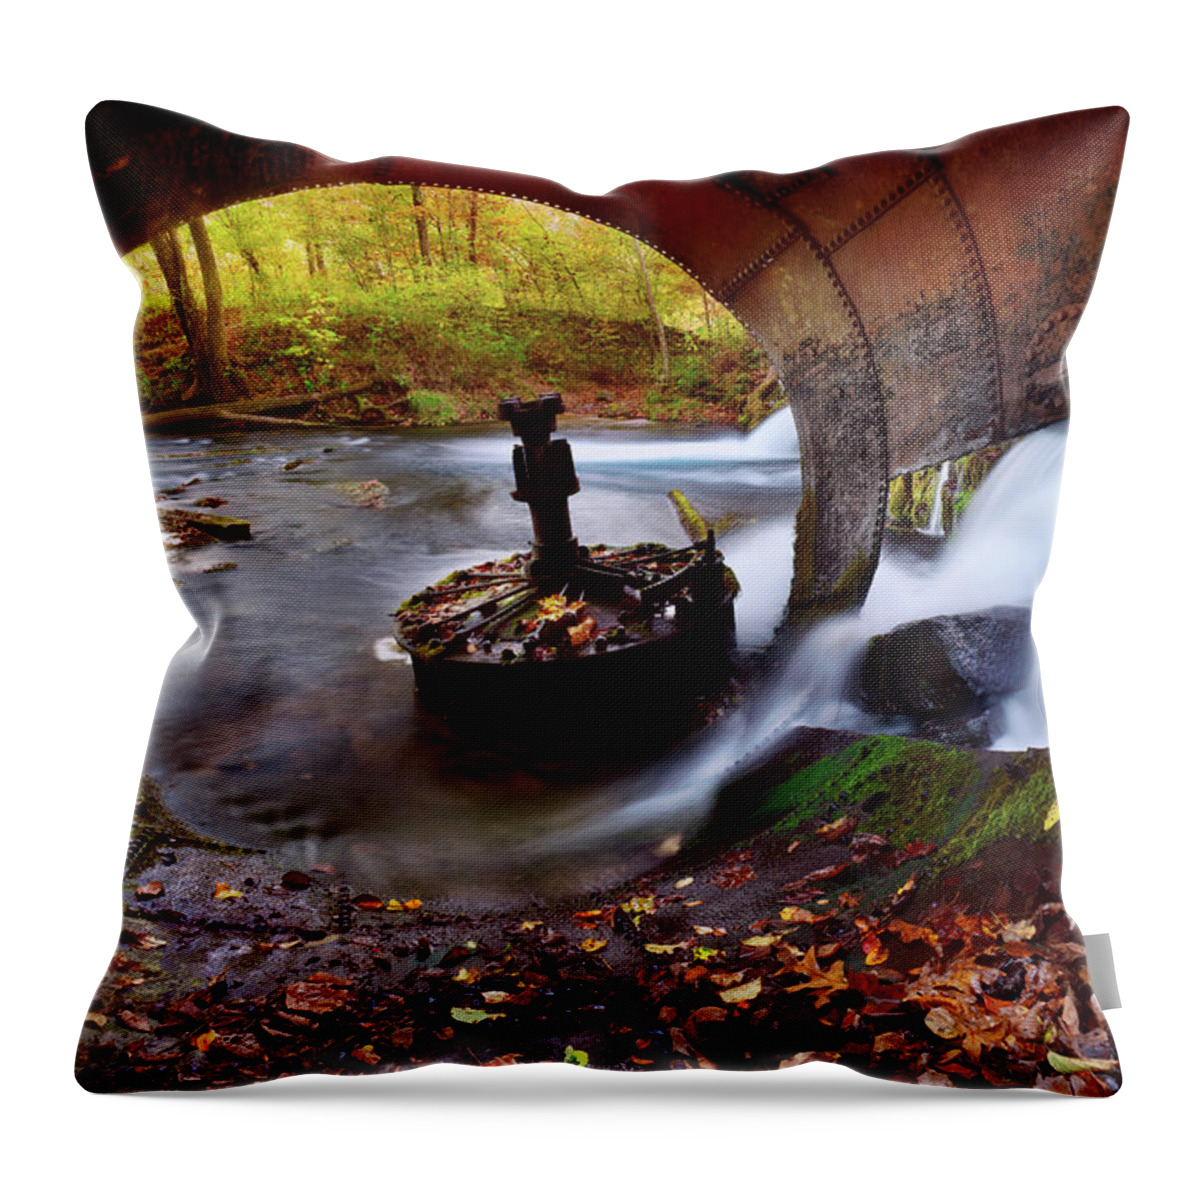 Mill Throw Pillow featuring the photograph Boze Mill by Robert Charity